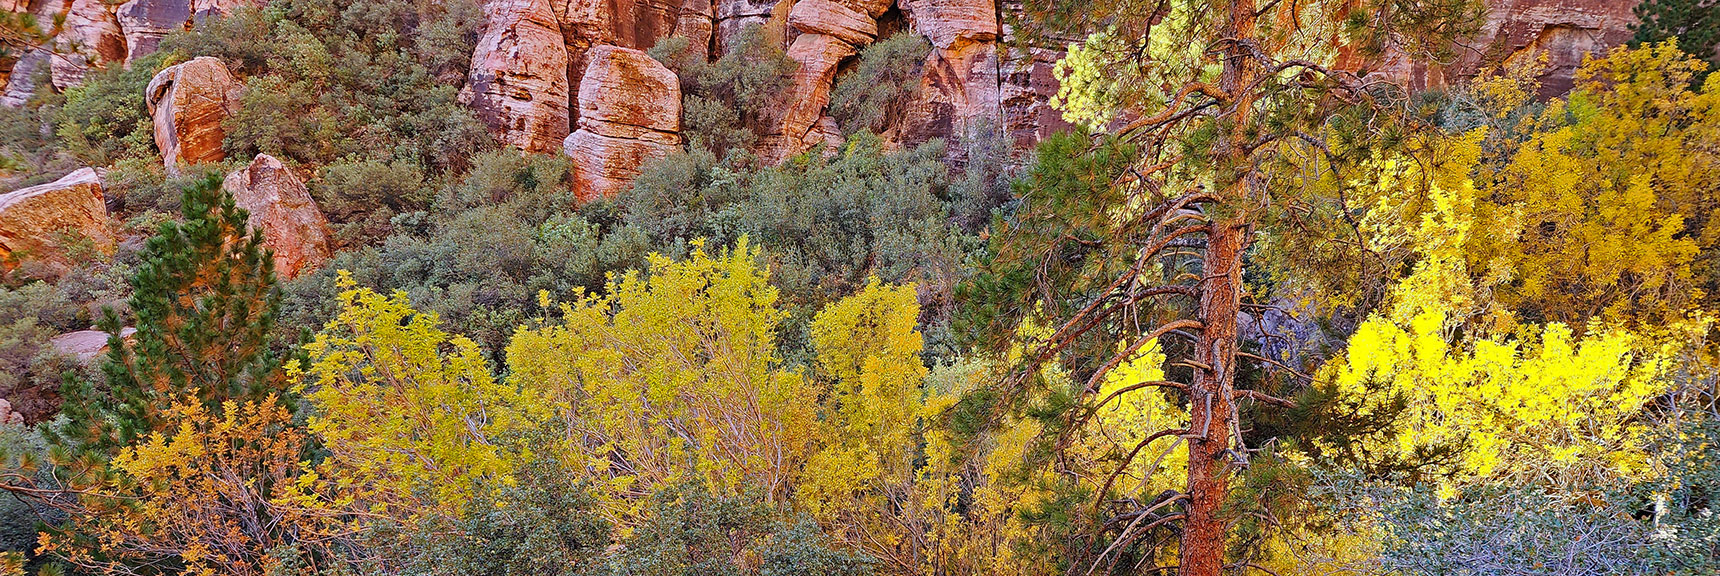 More Fall Colors at the Base of Mescalito Pyramid. Rock Climbers Begin Ascent Here. | Rock Climber Observations | Pine Creek Canyon | Rainbow Mountain Wilderness, Nevada